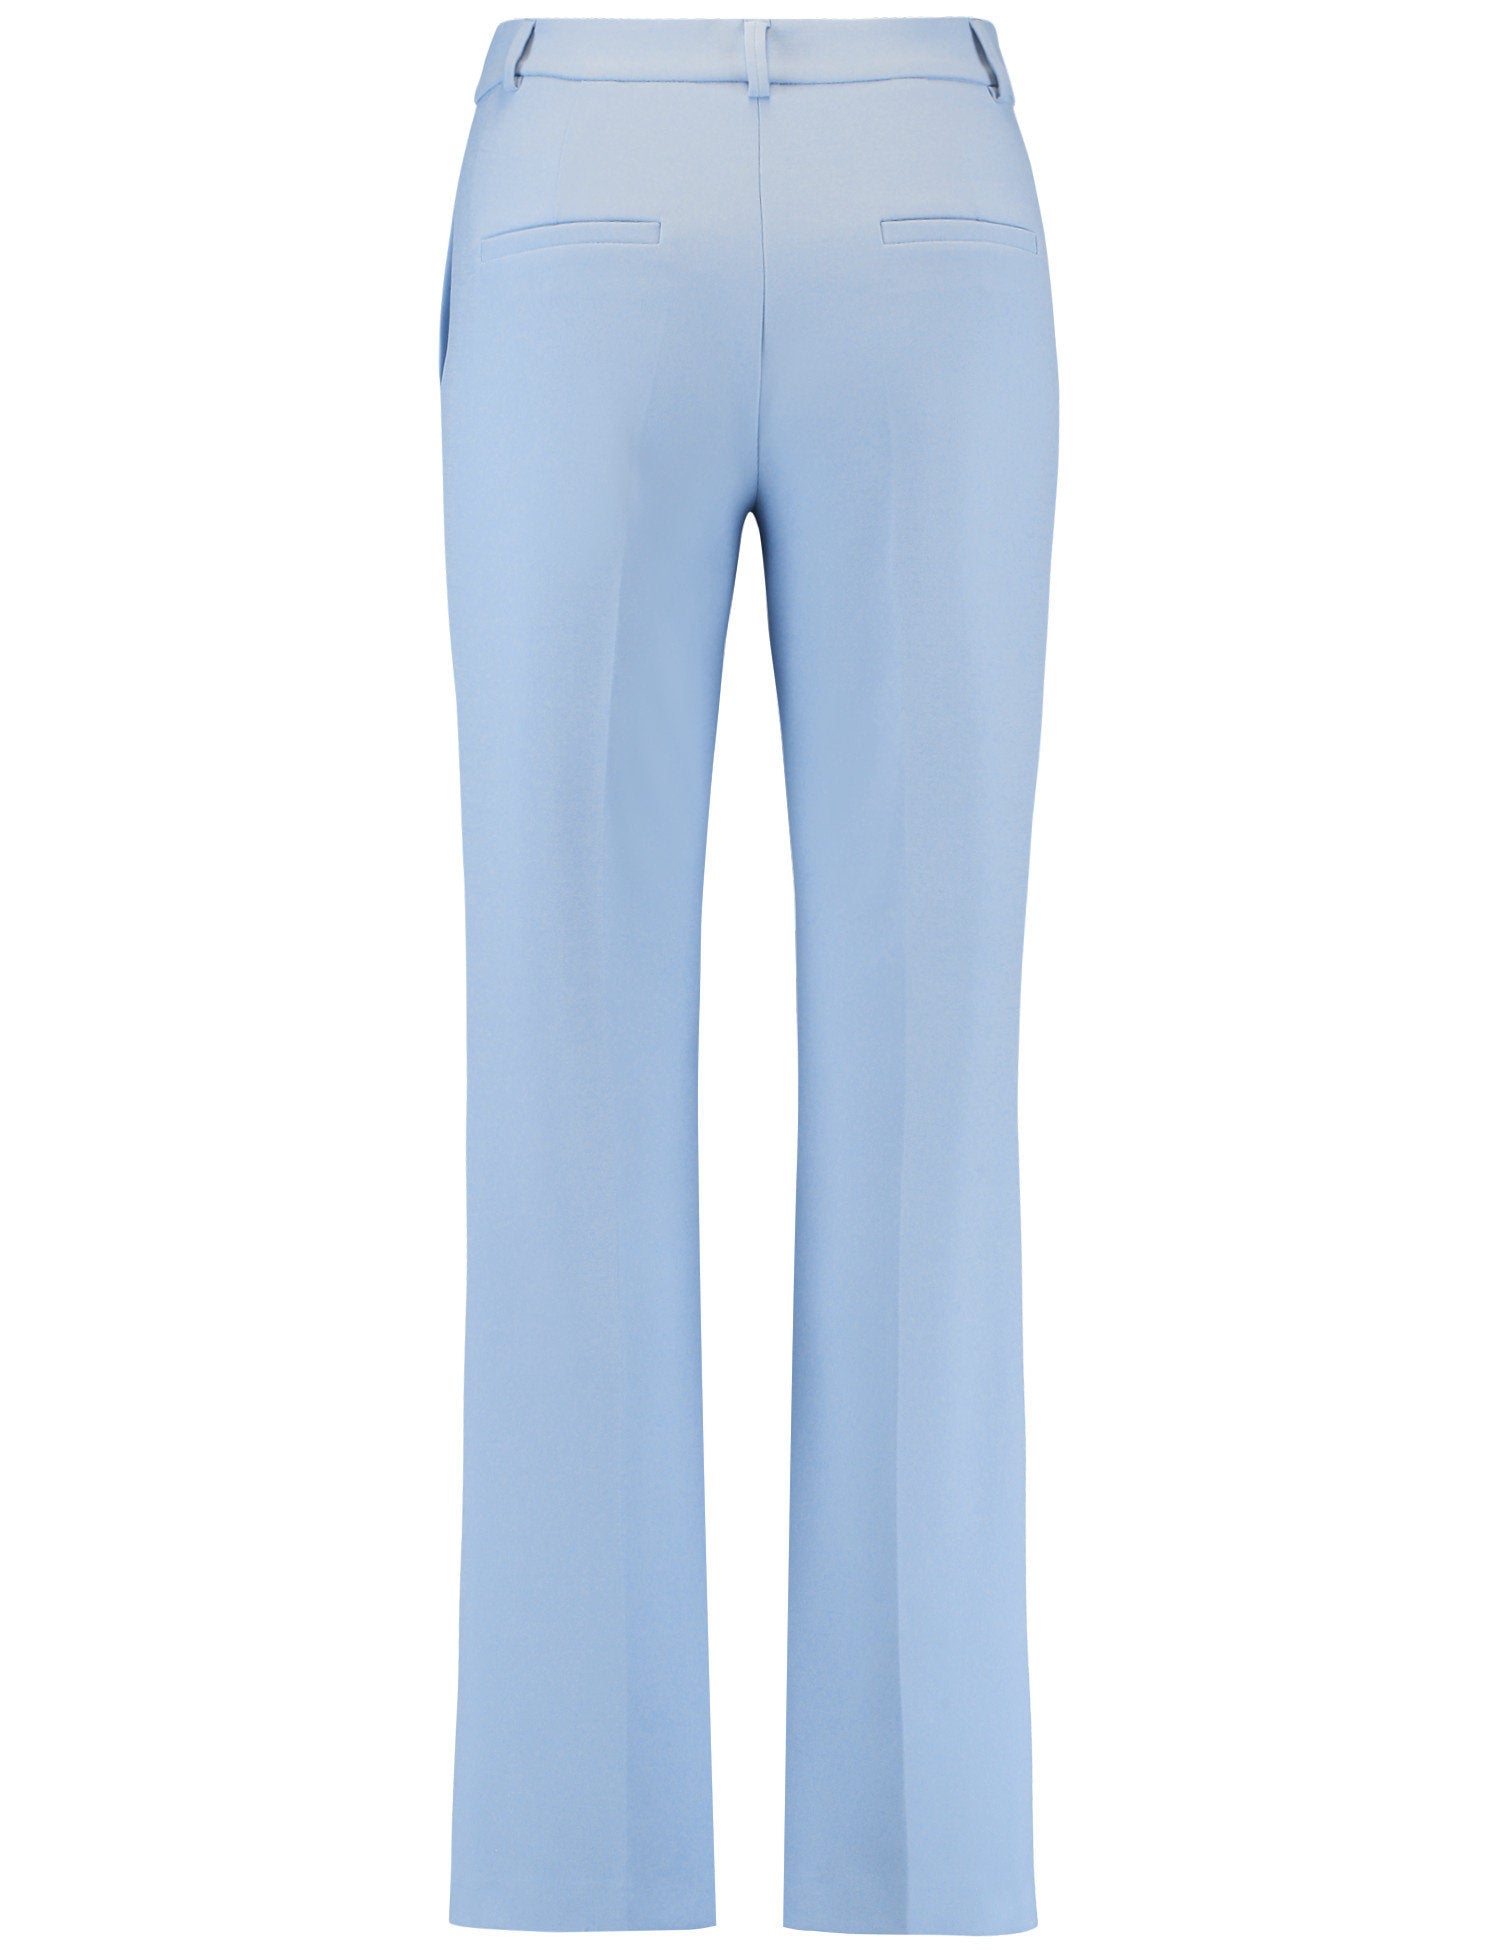 Slightly Flared Stretch Trousers_320002-31333_80933_03